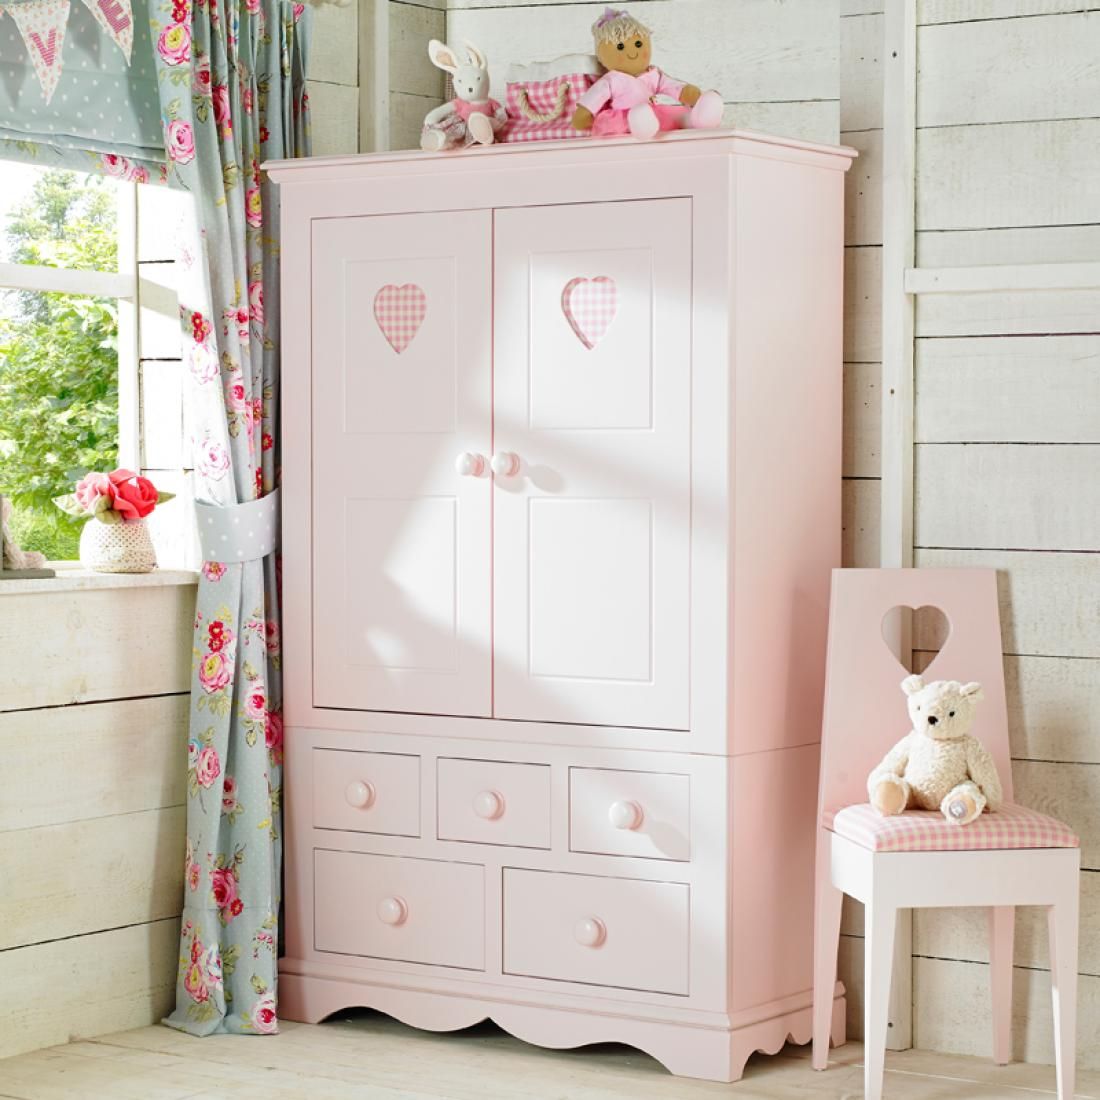 Looby Lou Combination Wardrobe | Childrens Wardrobe | Girls Wardrobe Intended For Nursery Wardrobes (View 12 of 15)